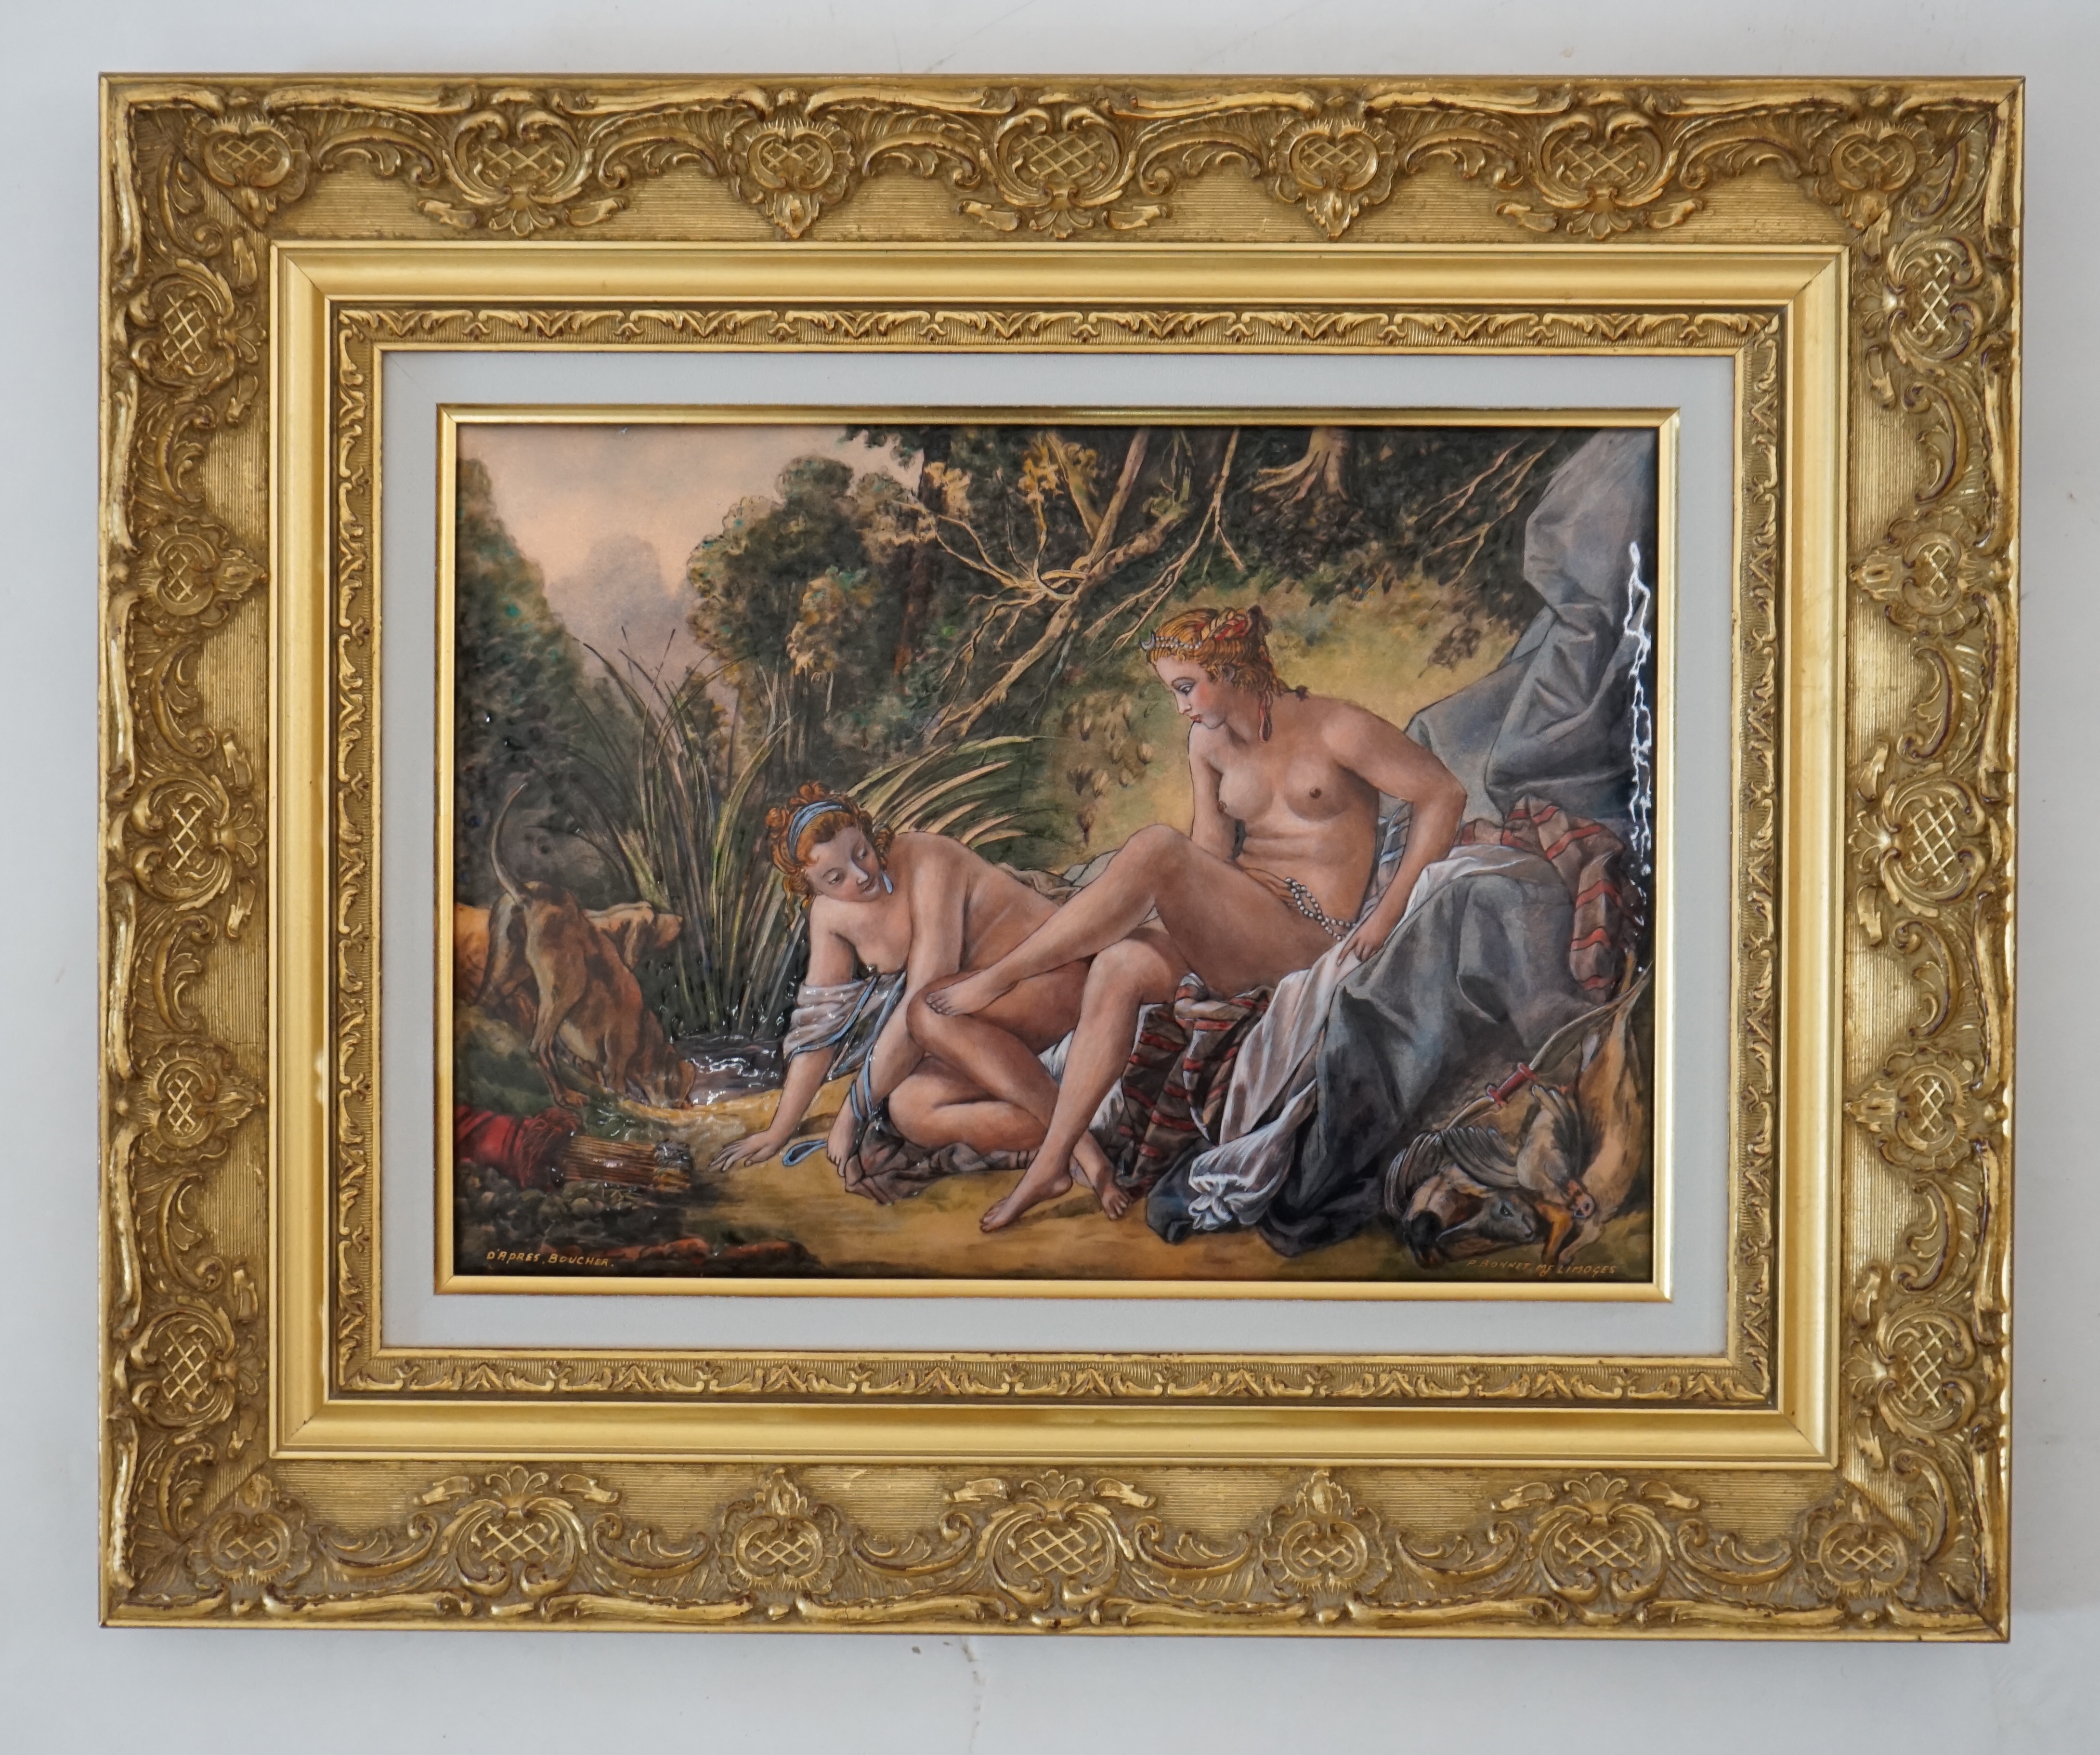 Pierre-Henri Bonnet after Boucher, a Limoges enamel plaque depicting Diana bathing with attendants, signed with maker's labels verso, 24.5 x 34.5cm, in original gilt frame. Condition - very good